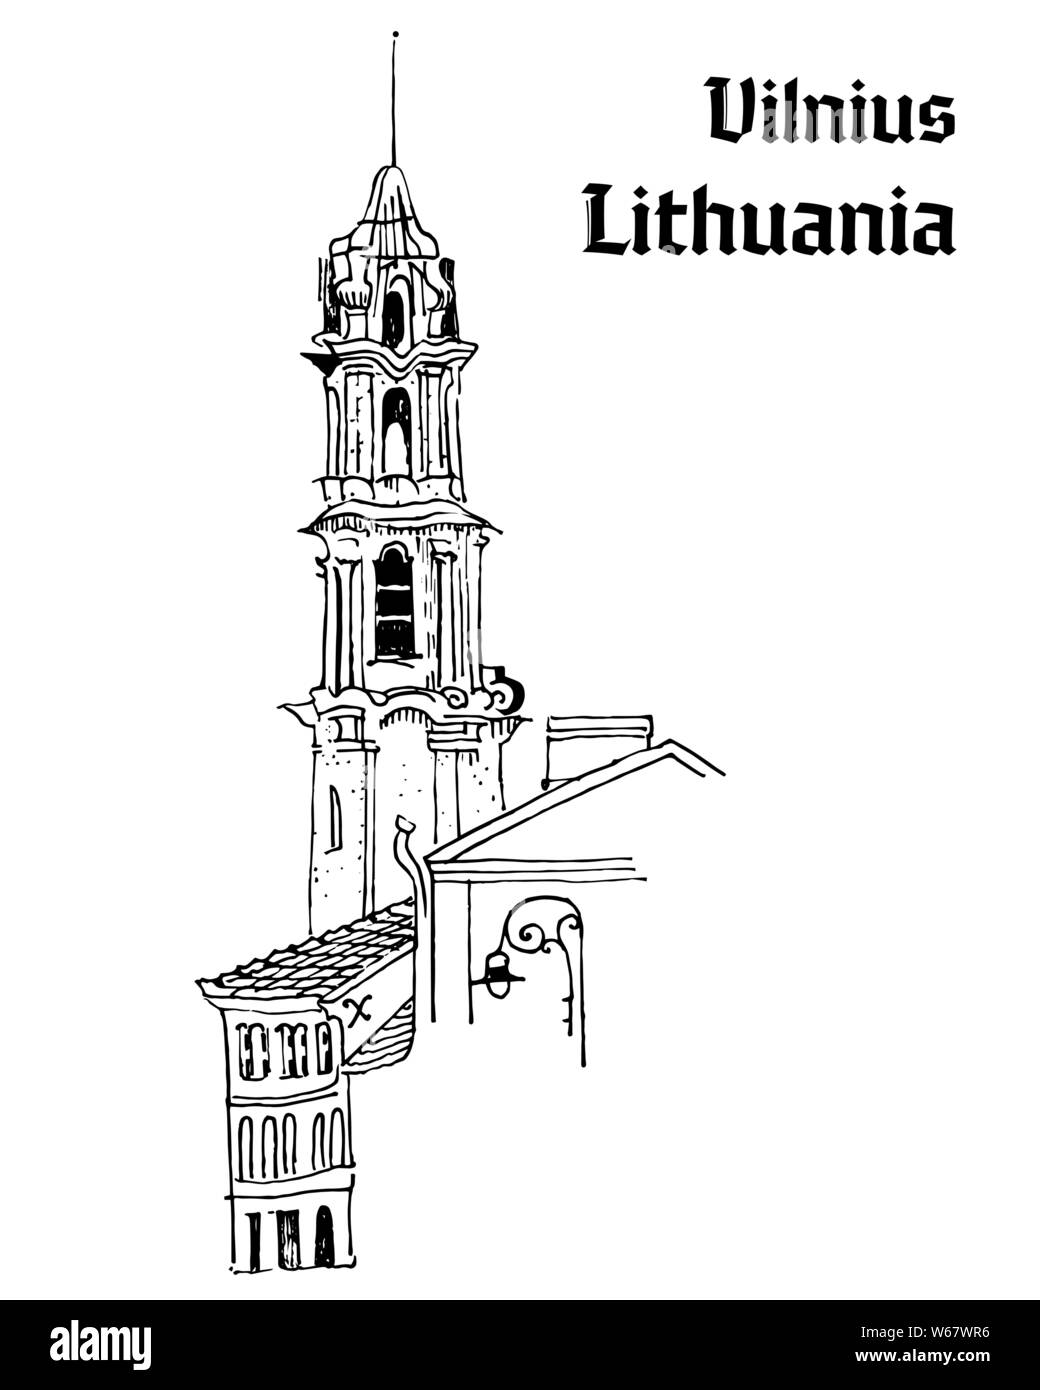 Old town motif. Vilnius, Lithuania. Bell tower, medieval houses, street lantern. Baltic states landmark. Postcard, coloring page. Hand drawn sketchy s Stock Vector